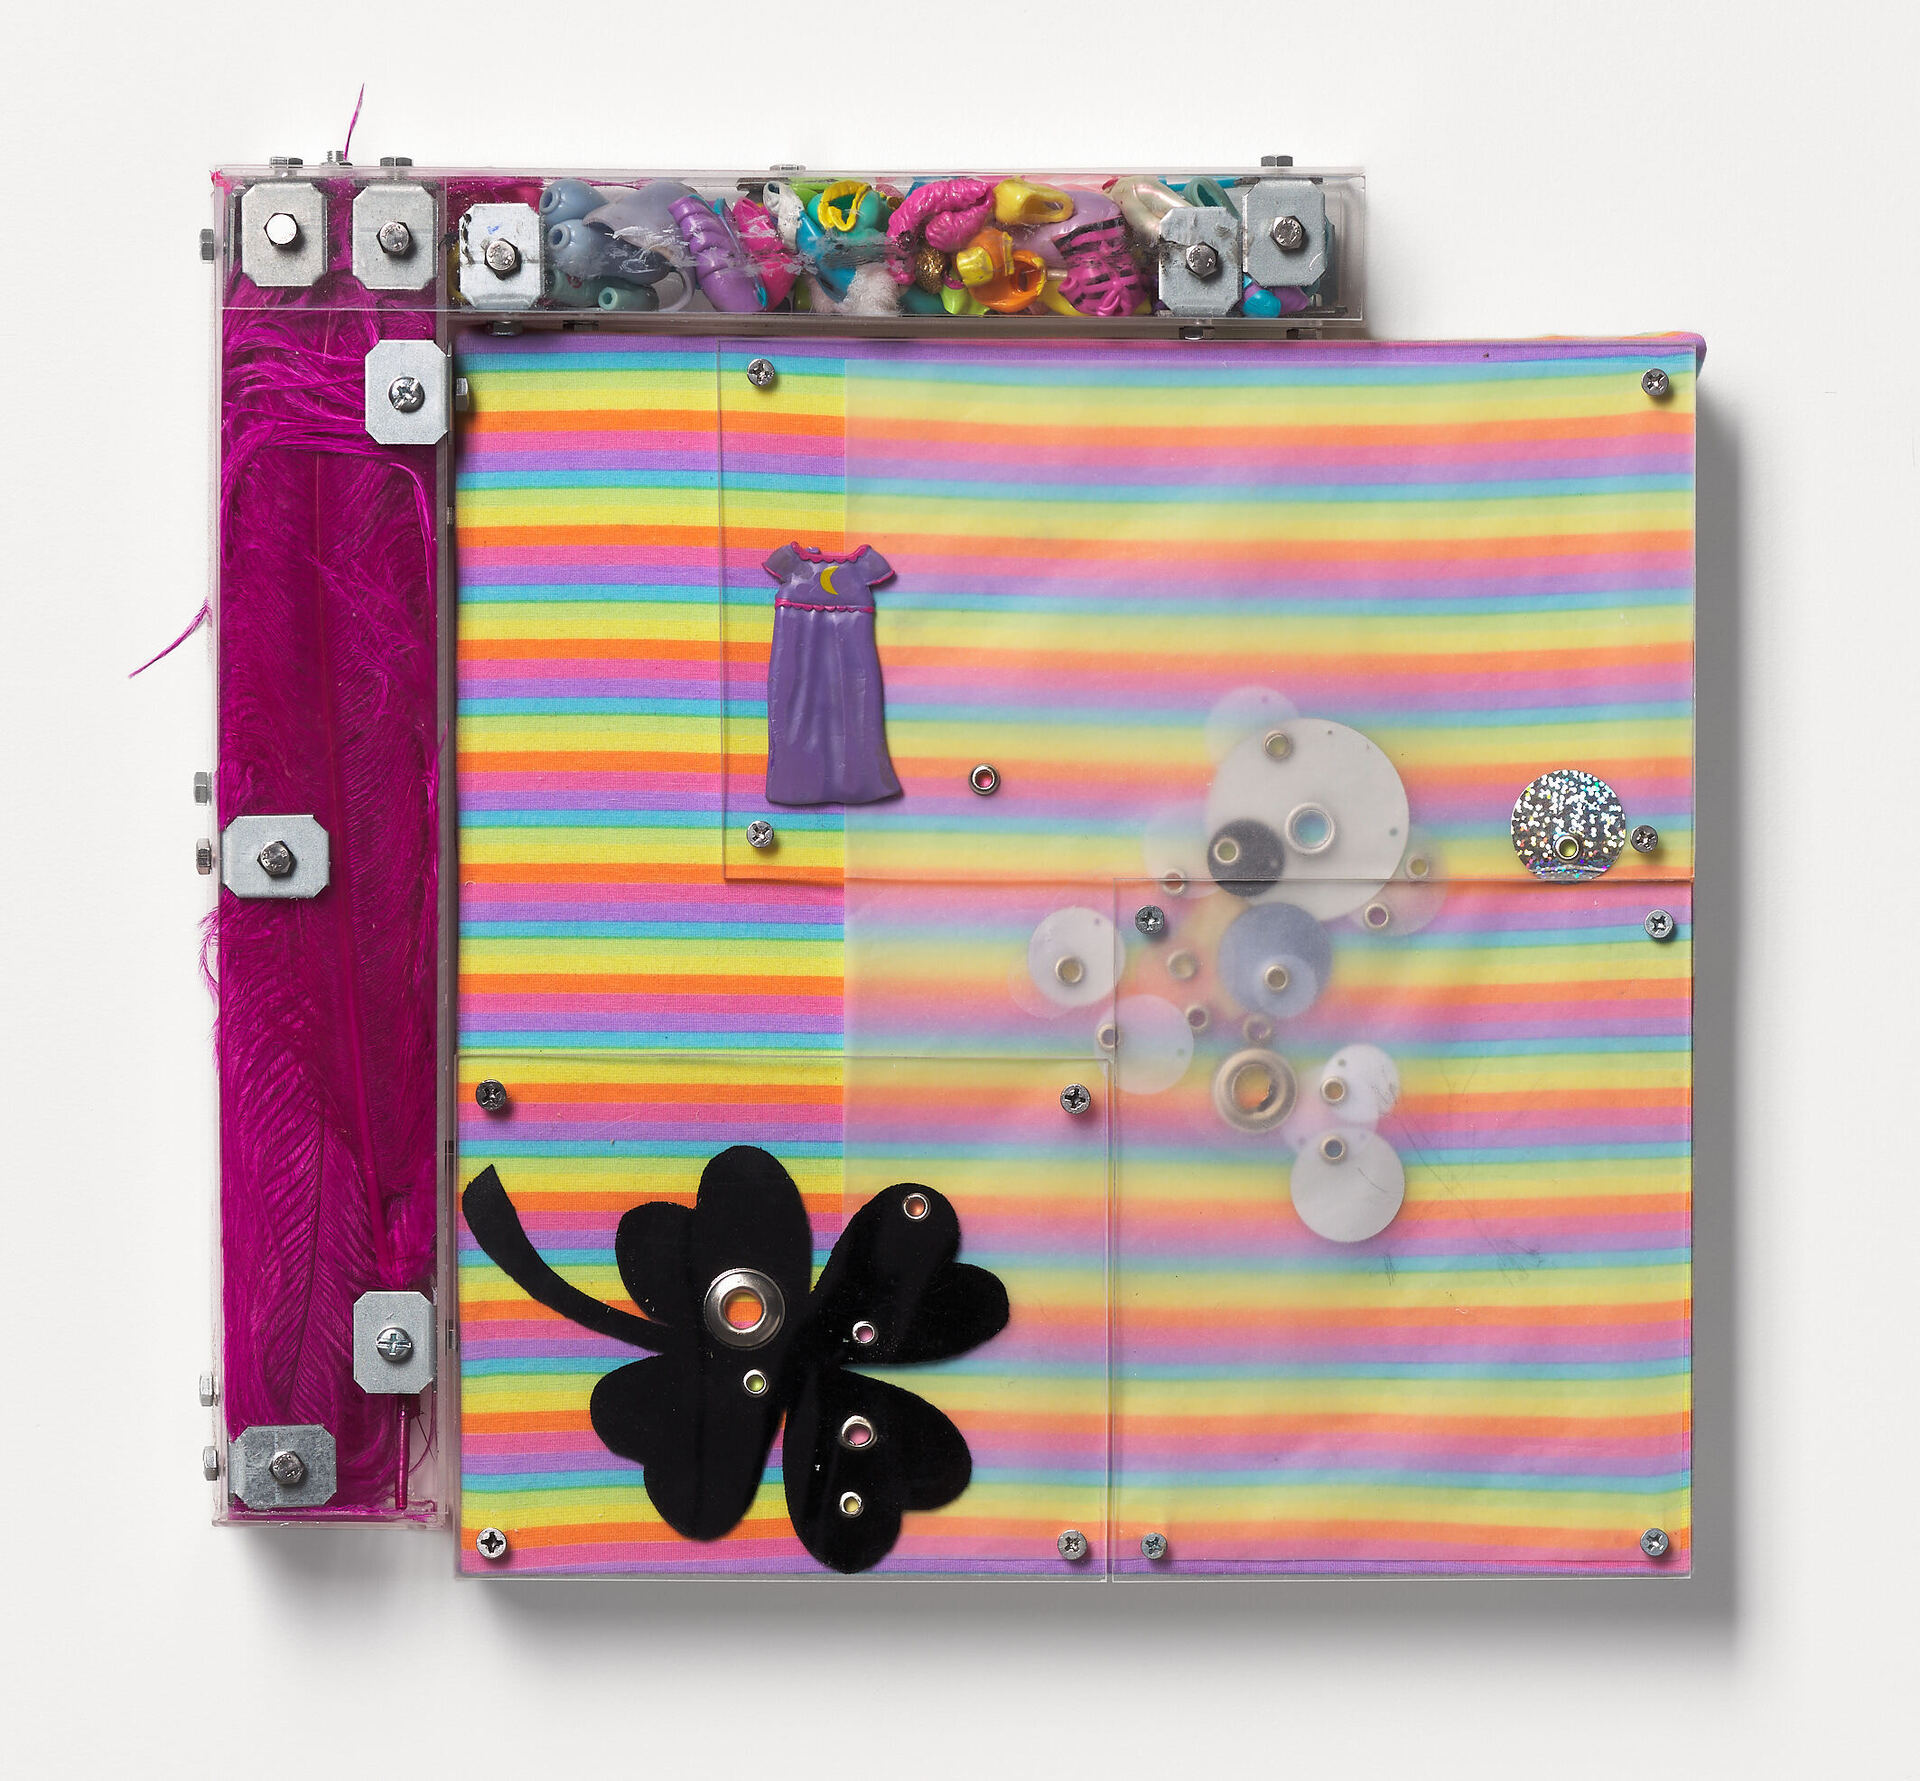 Spencer Lai Untitled, 2021 Wood panel, vintage fabric, Perspex, clothing for Polly Pocket, ostrich feathers, velvet, rivets, sequins,  37 X 35 cm